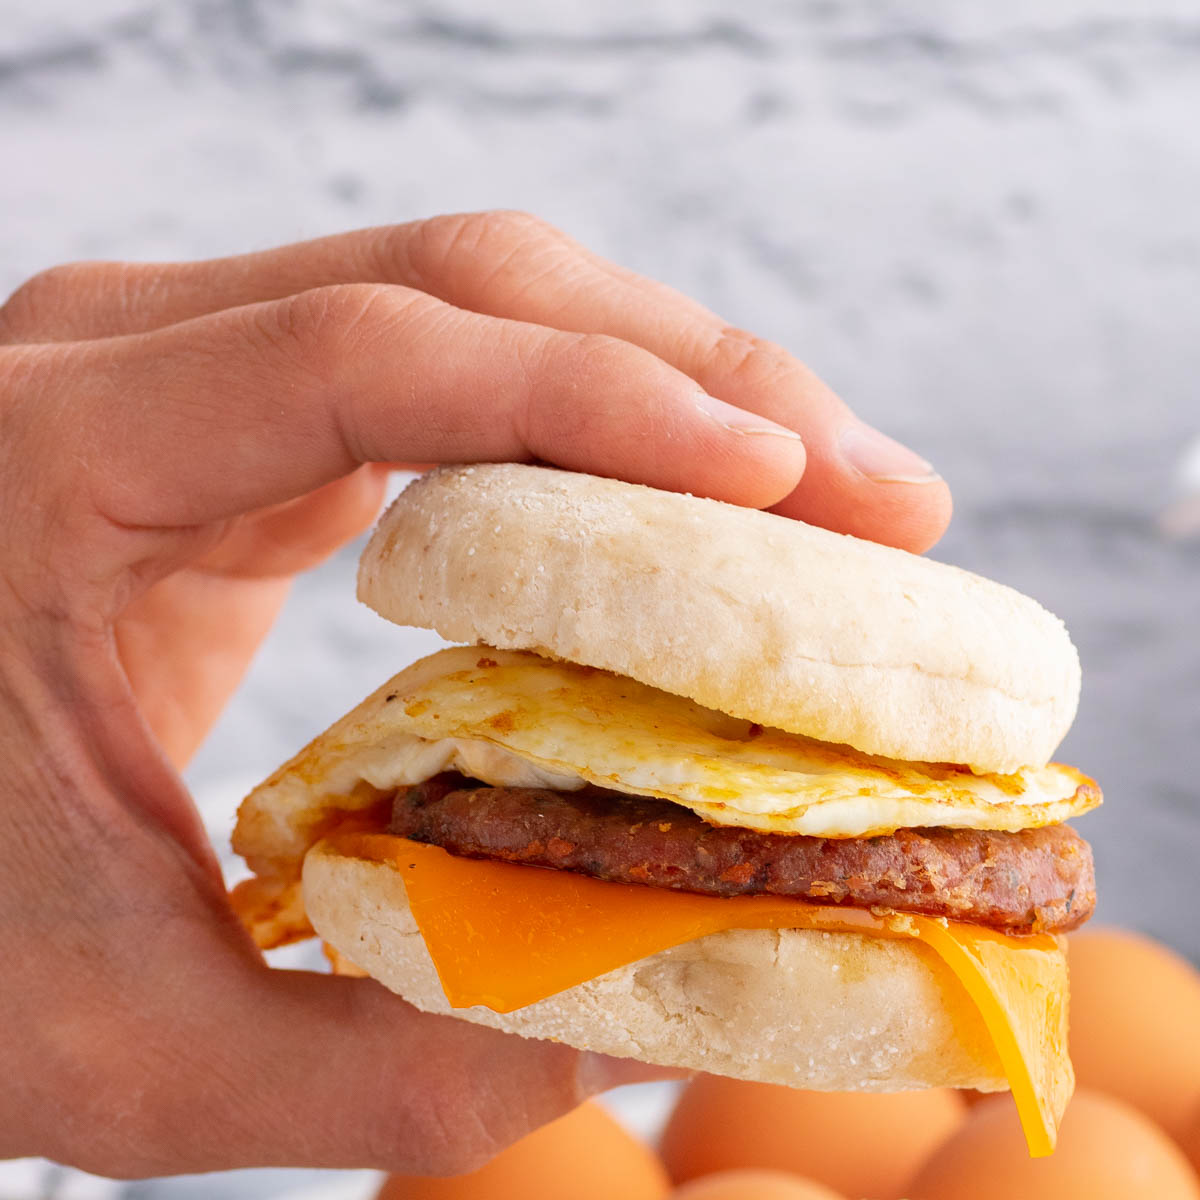 A hand holds an egg and sausage breakfast sandwich.